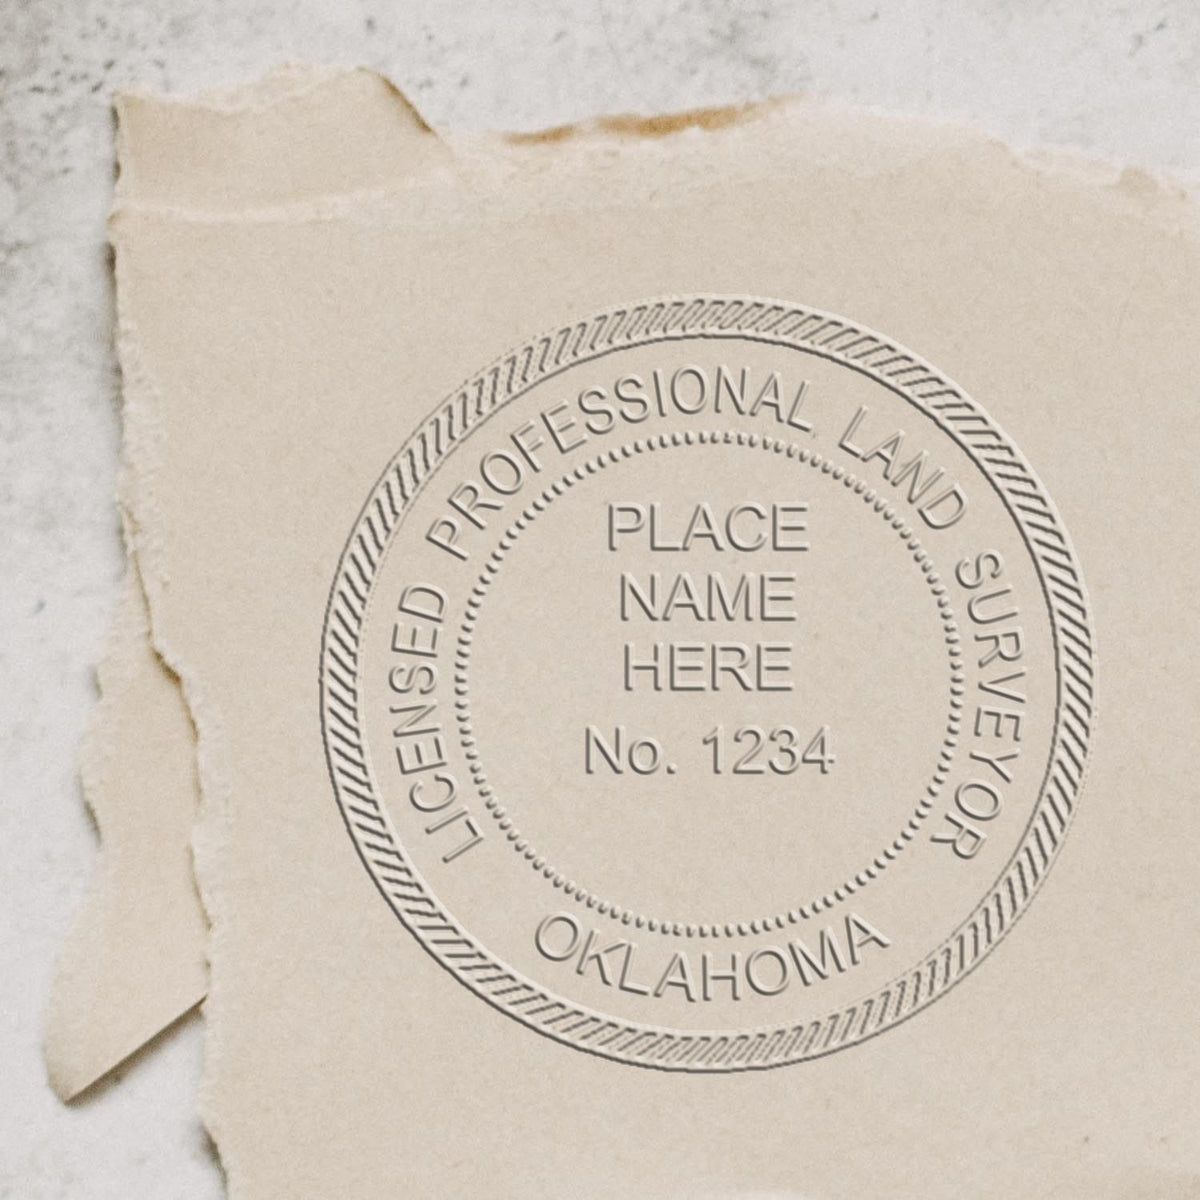 A photograph of the State of Oklahoma Soft Land Surveyor Embossing Seal stamp impression reveals a vivid, professional image of the on paper.